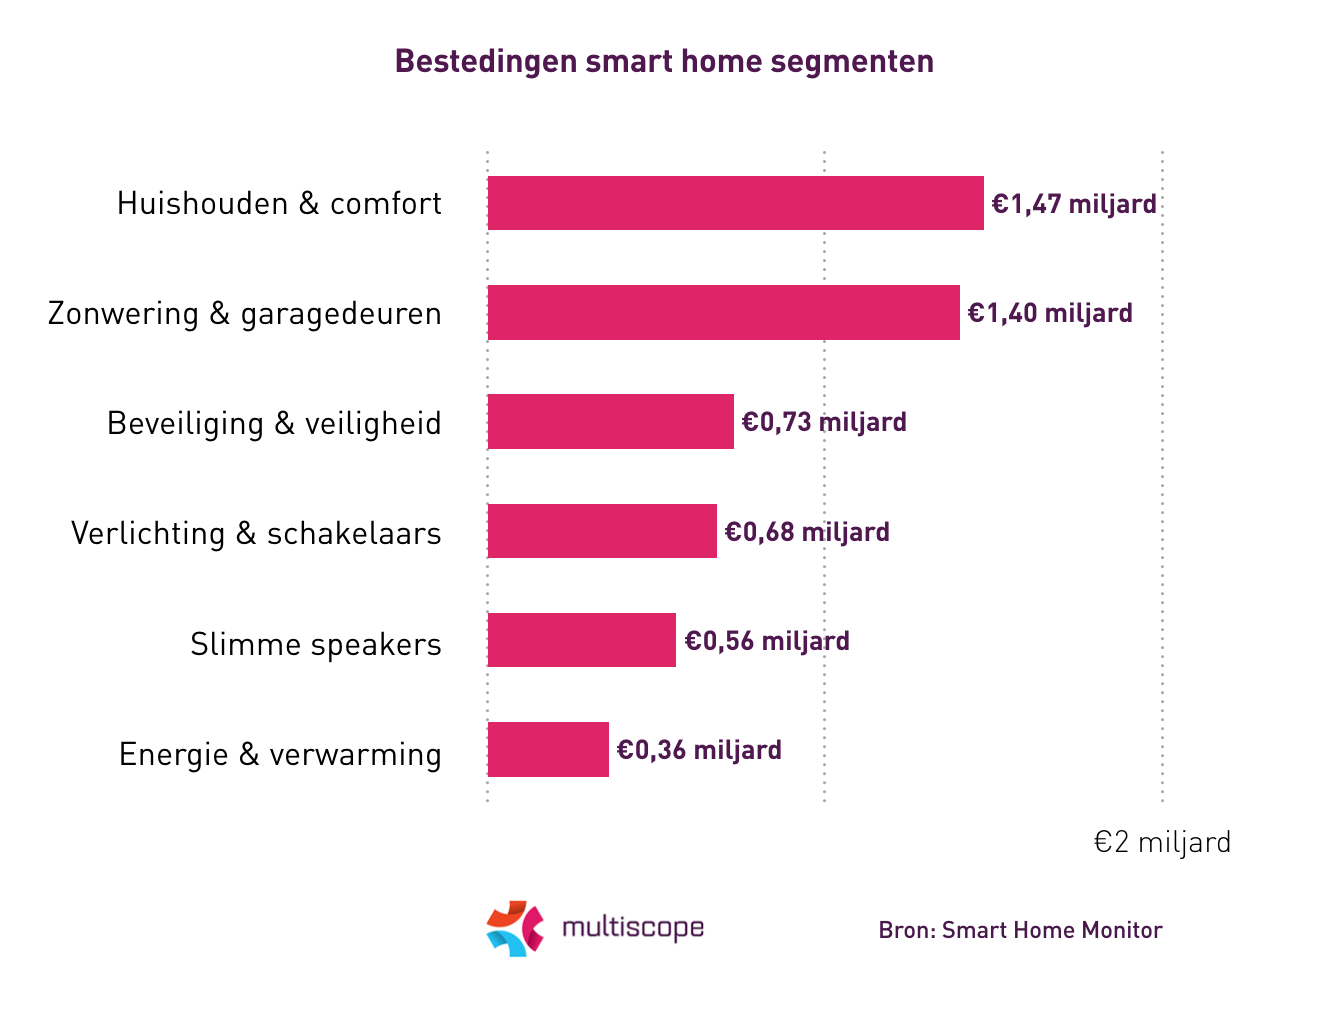 Research: More than 4.5 million smart households in the Netherlands